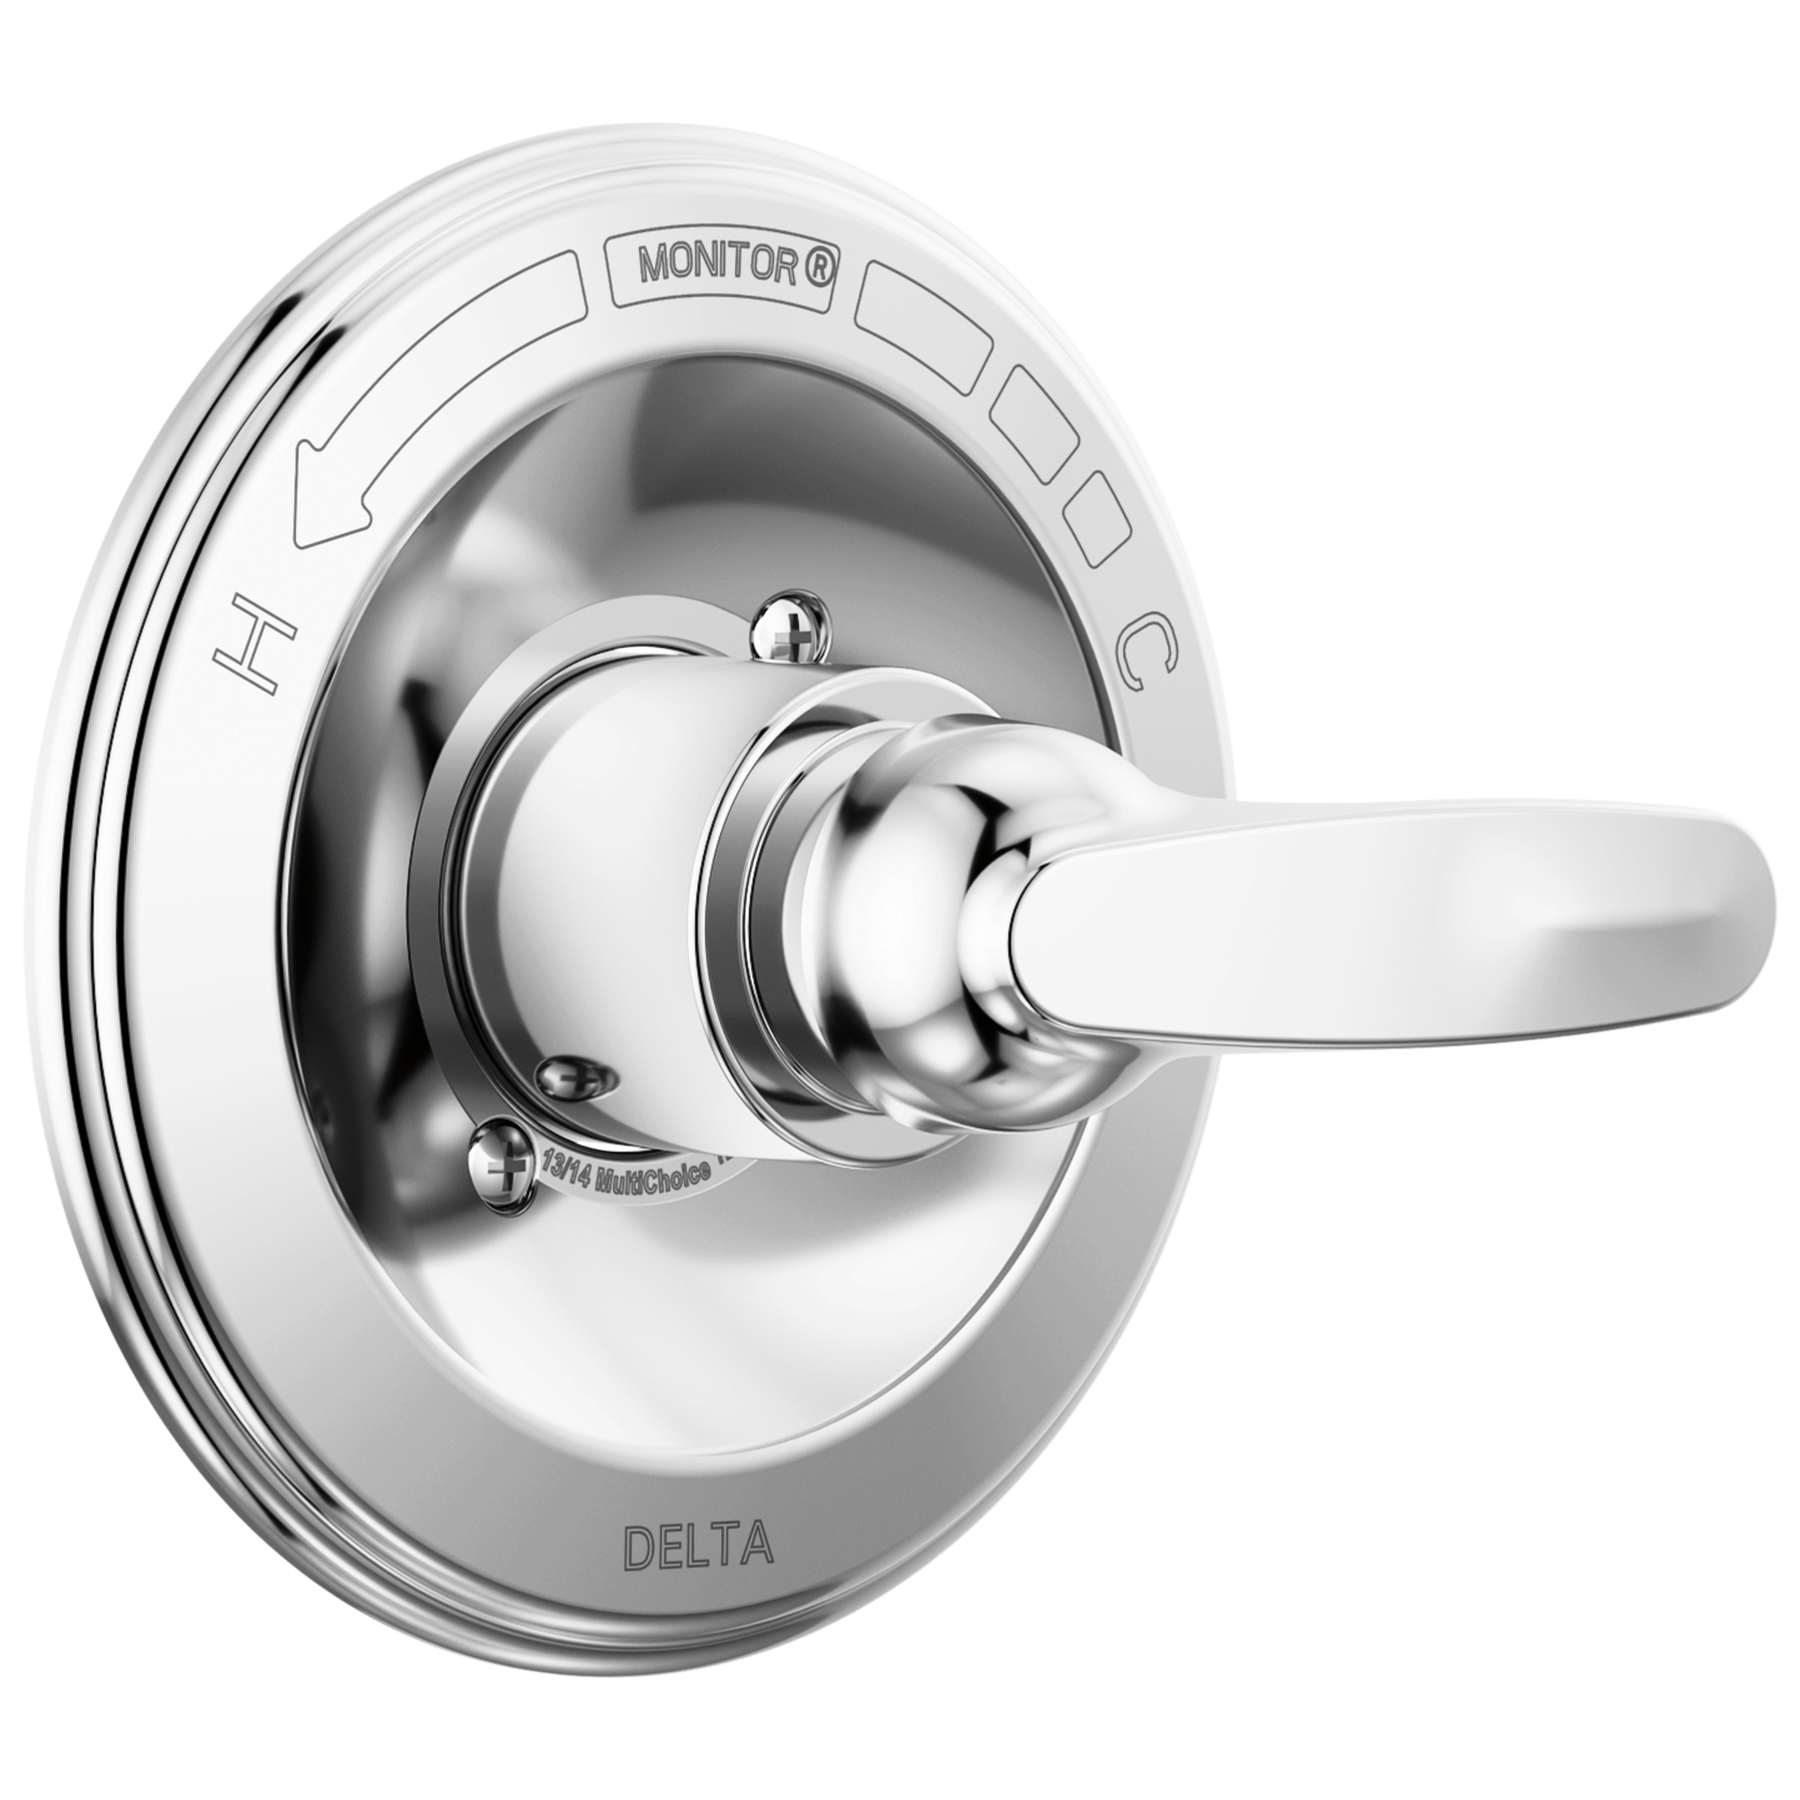 Monitor® 13 Series Valve Only Trim in Chrome BT13010 | Delta Faucet